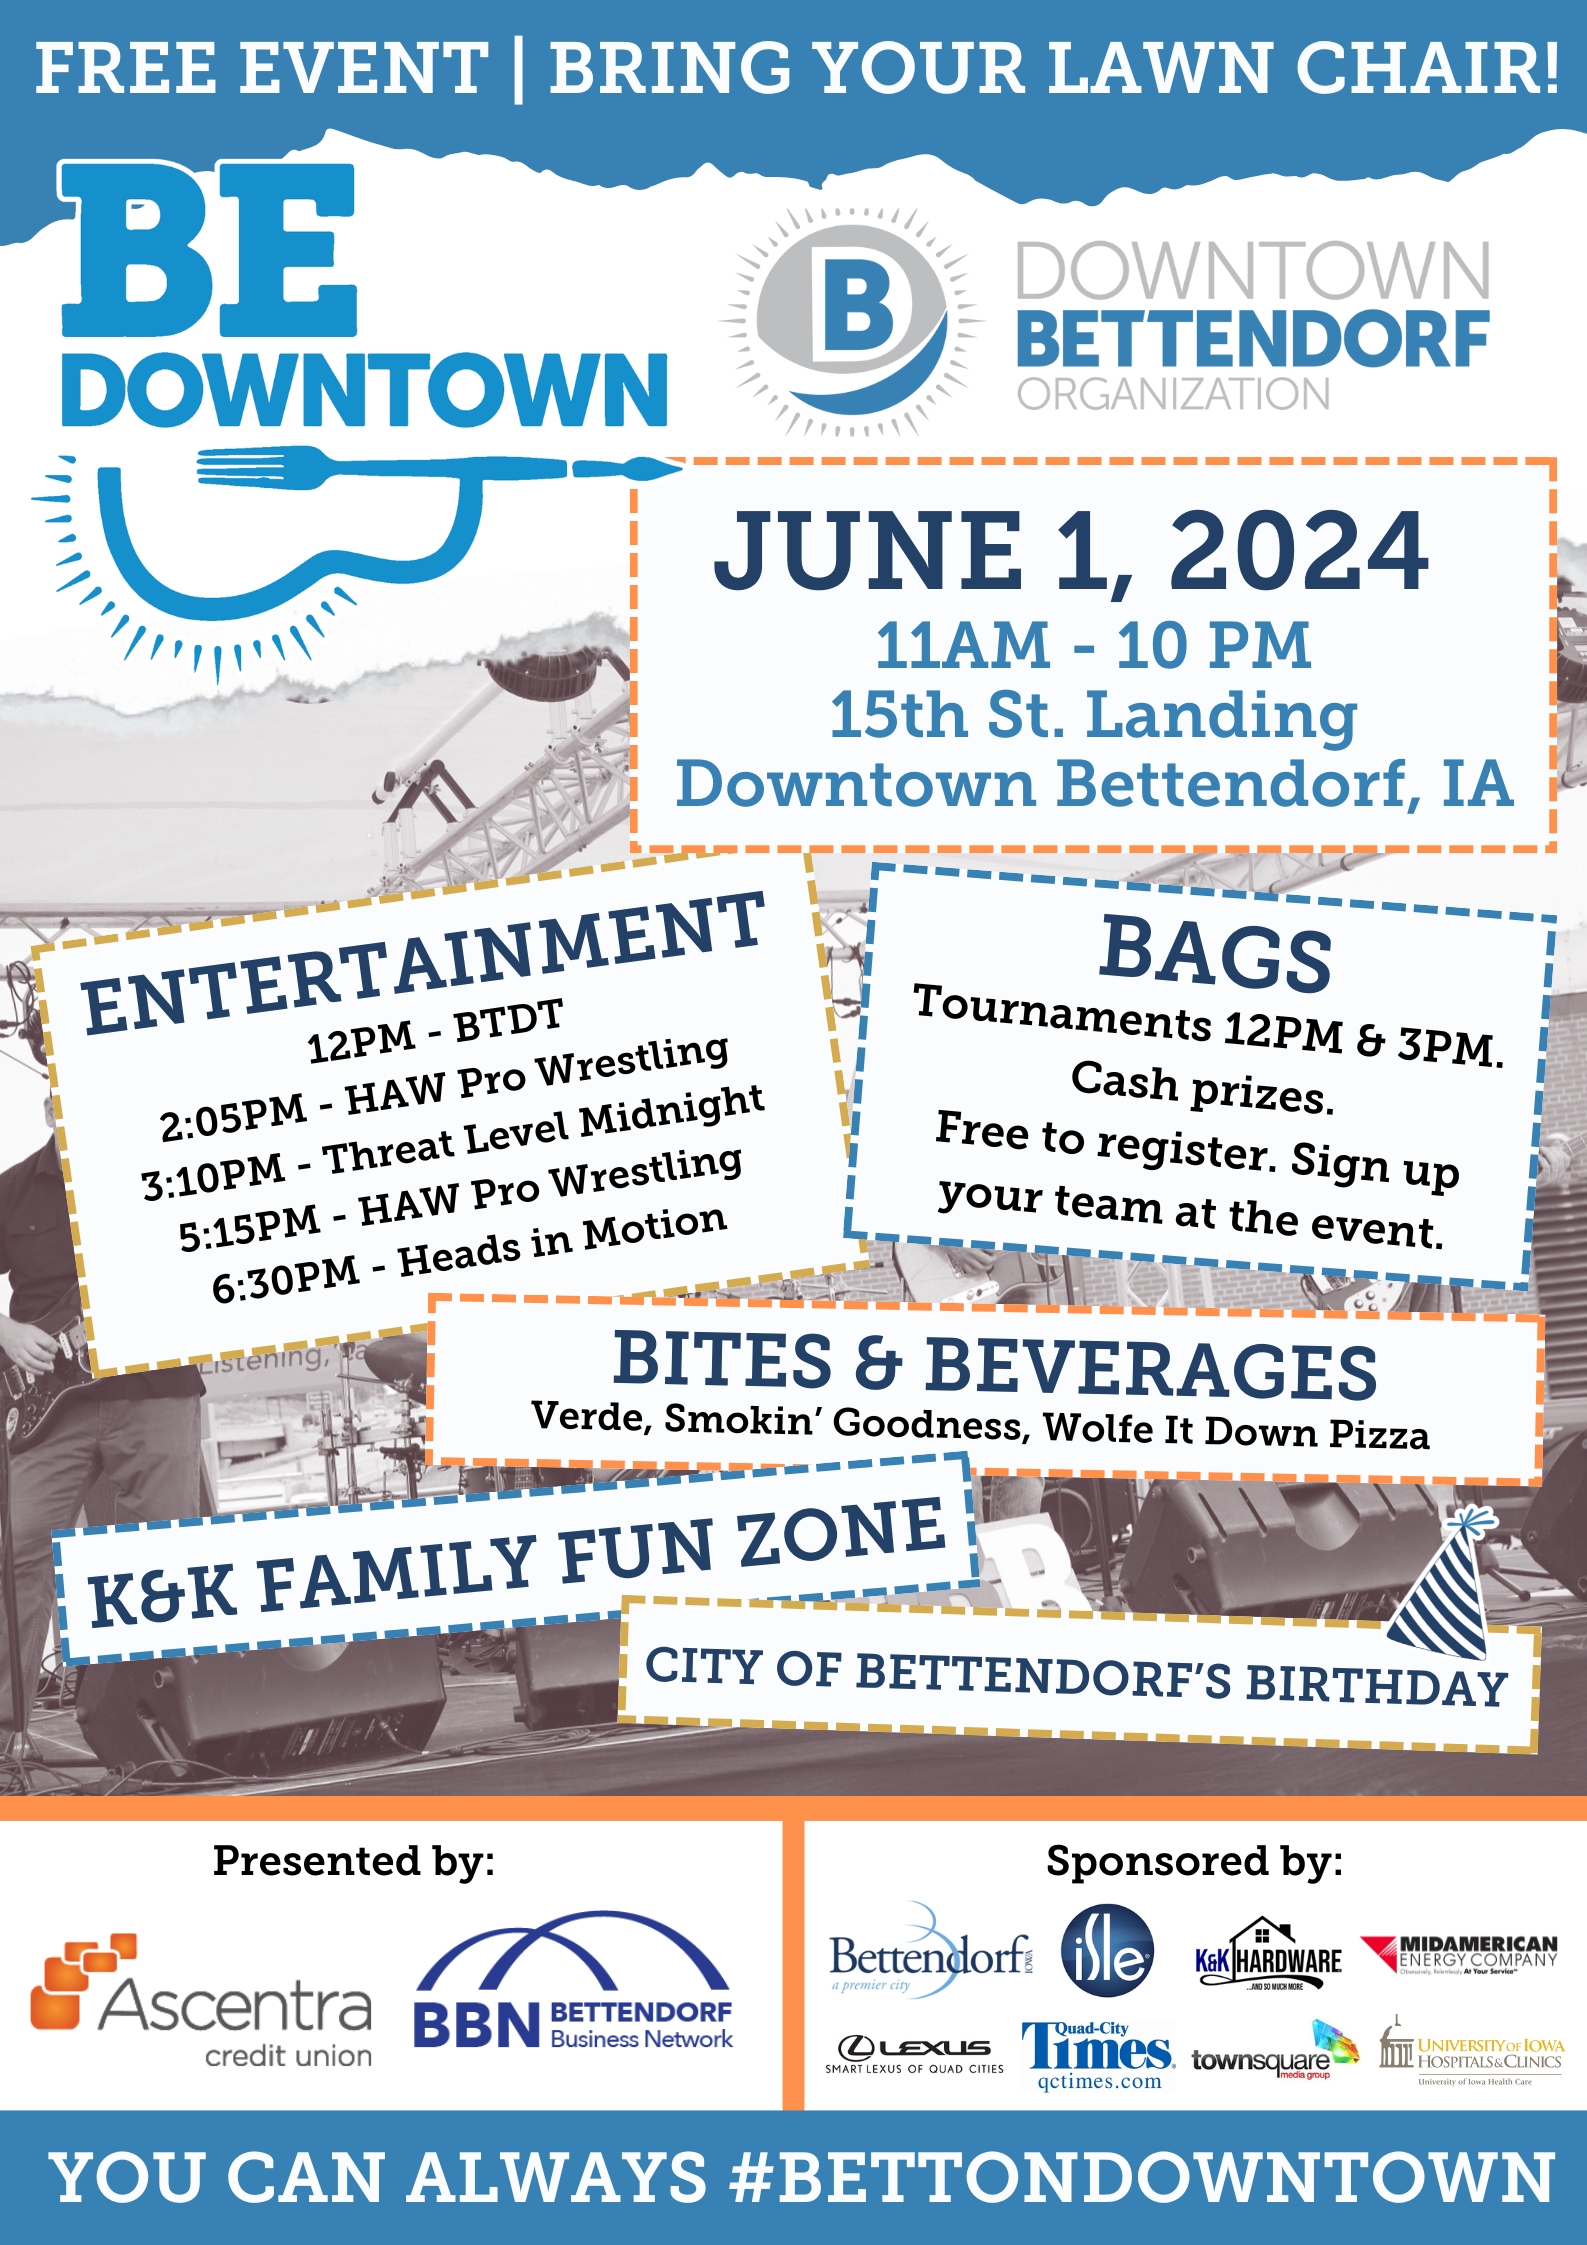 poster for be downtown event in downtown bettendorf